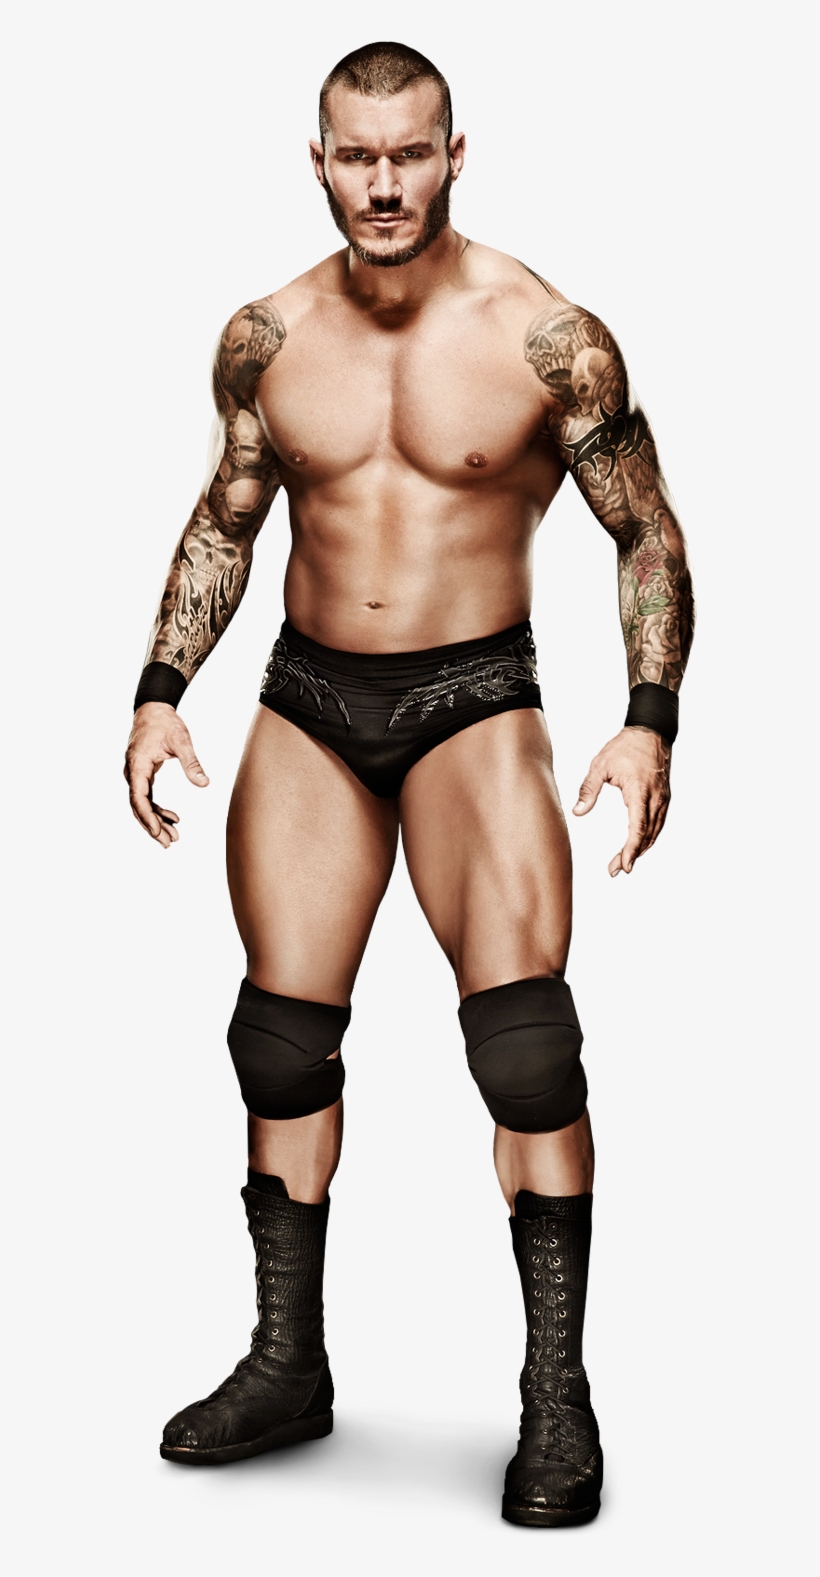 Post By Slappy On Aug 29, 2013 At - Randy Orton Full Body, transparent png #8932937